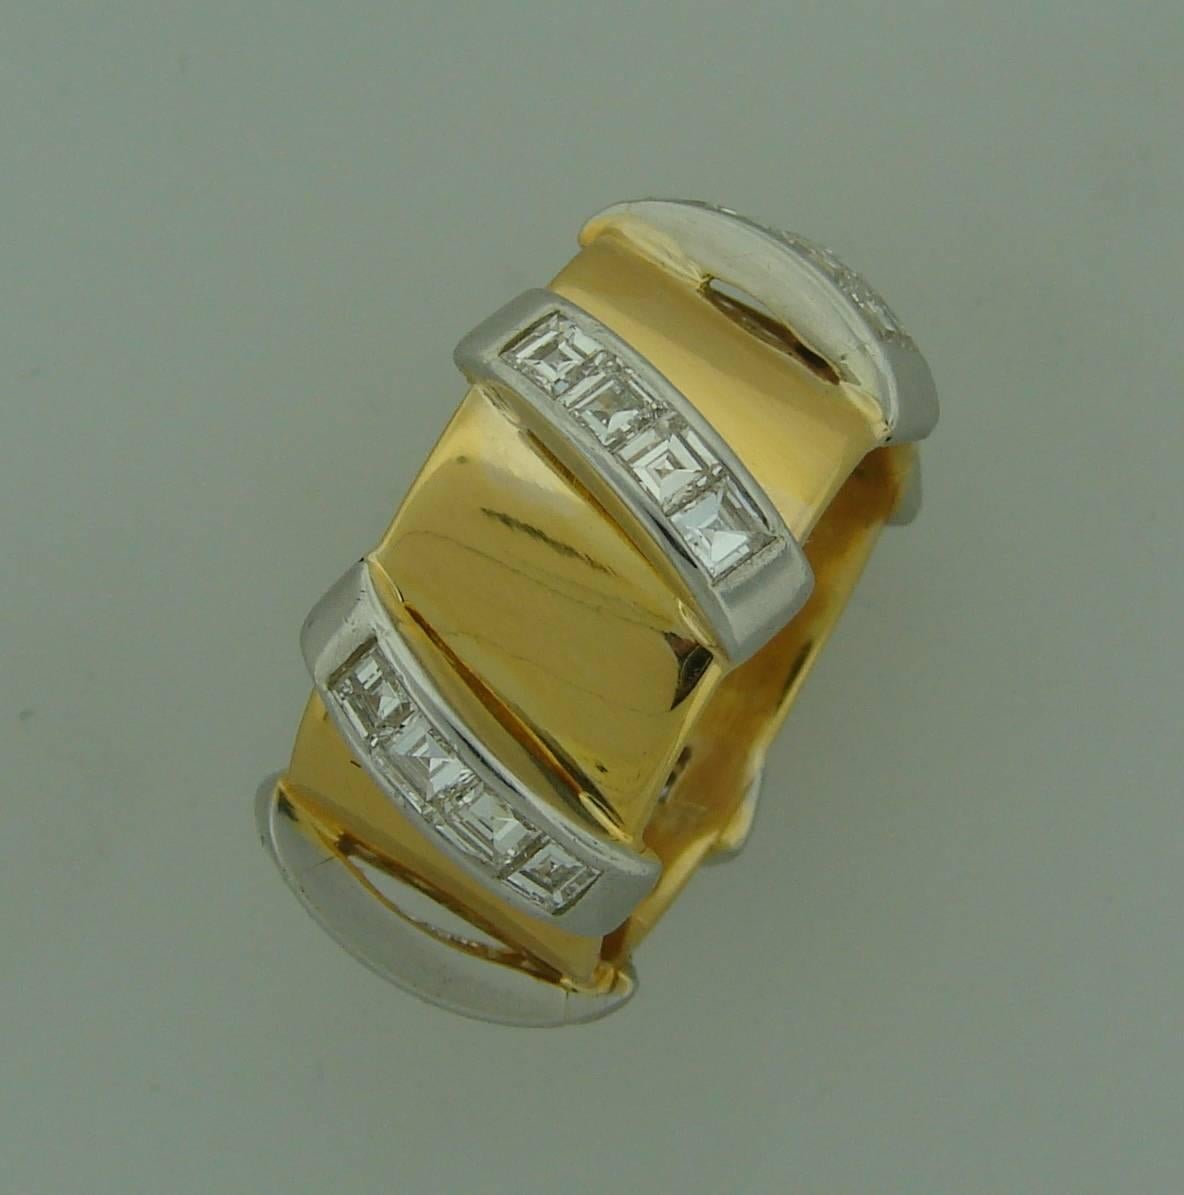 Bold yet elegant band ring created by Seaman Schepps in the 1980s. Beautiful highly polished yellow gold shank crossed over with six diamond bars gives the band modernist and stylish look and boldness. 
The ring is made of 18 karat (tested) yellow